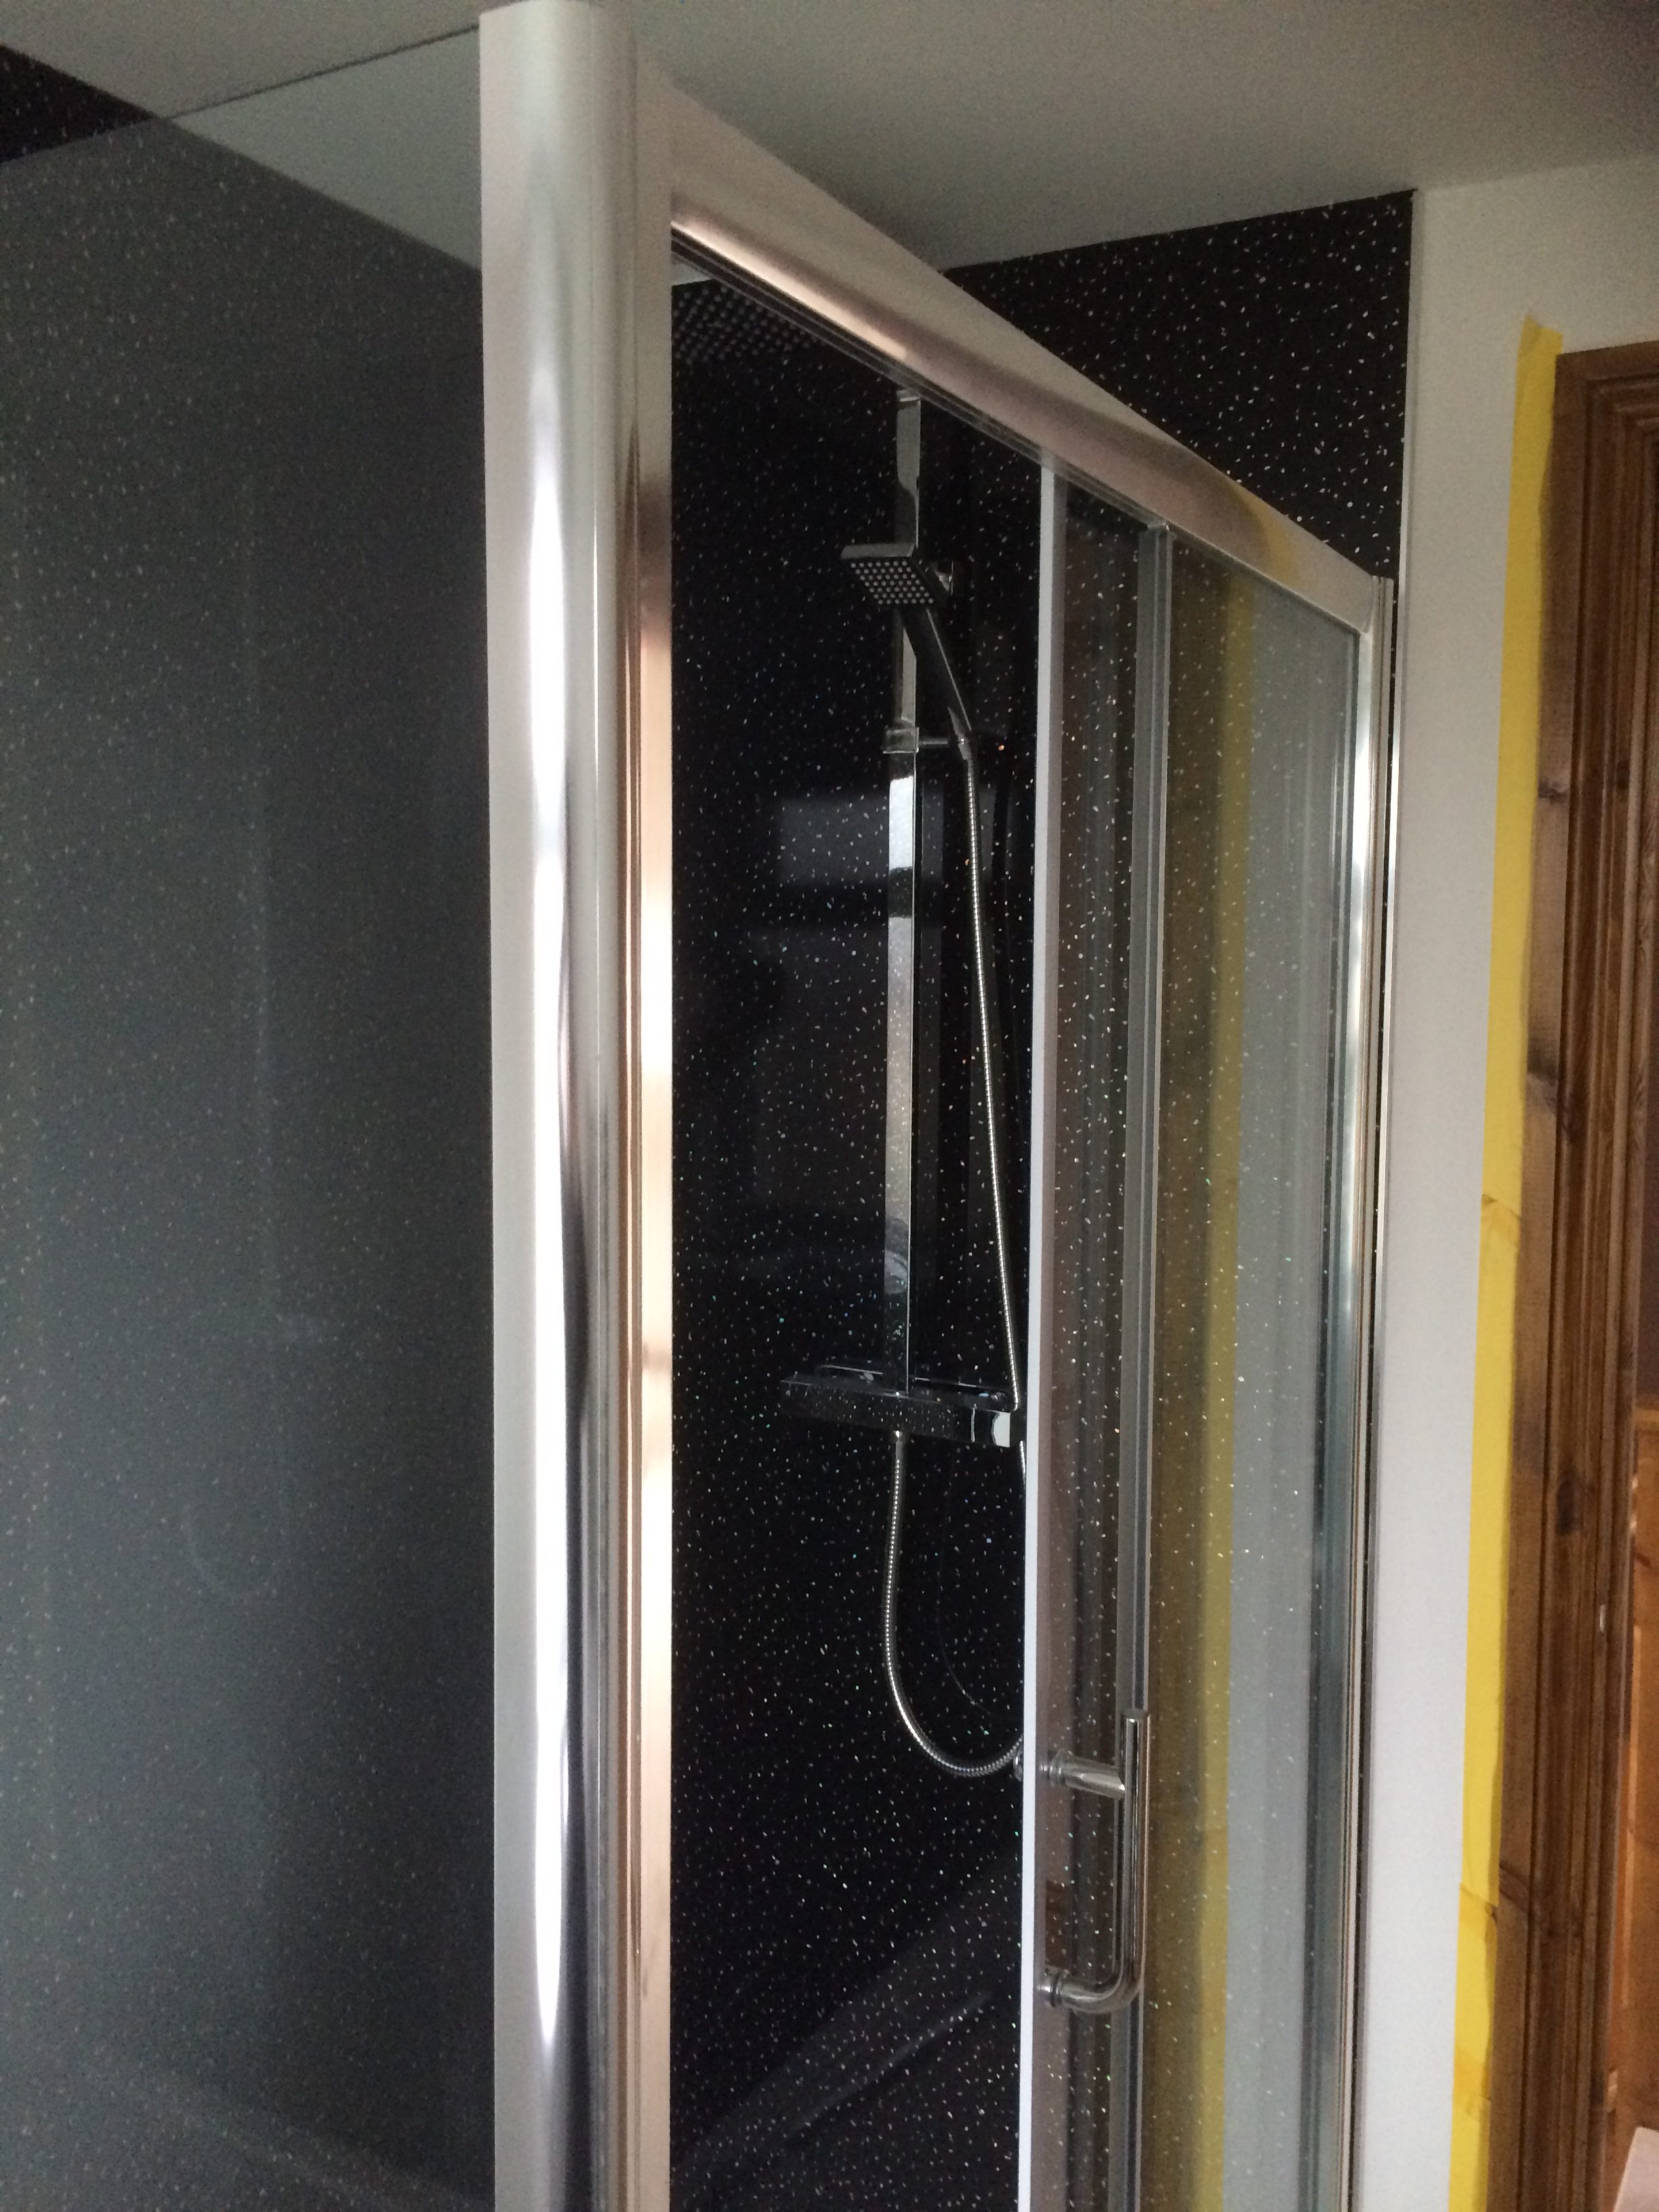 Shower with black sparkly tiles